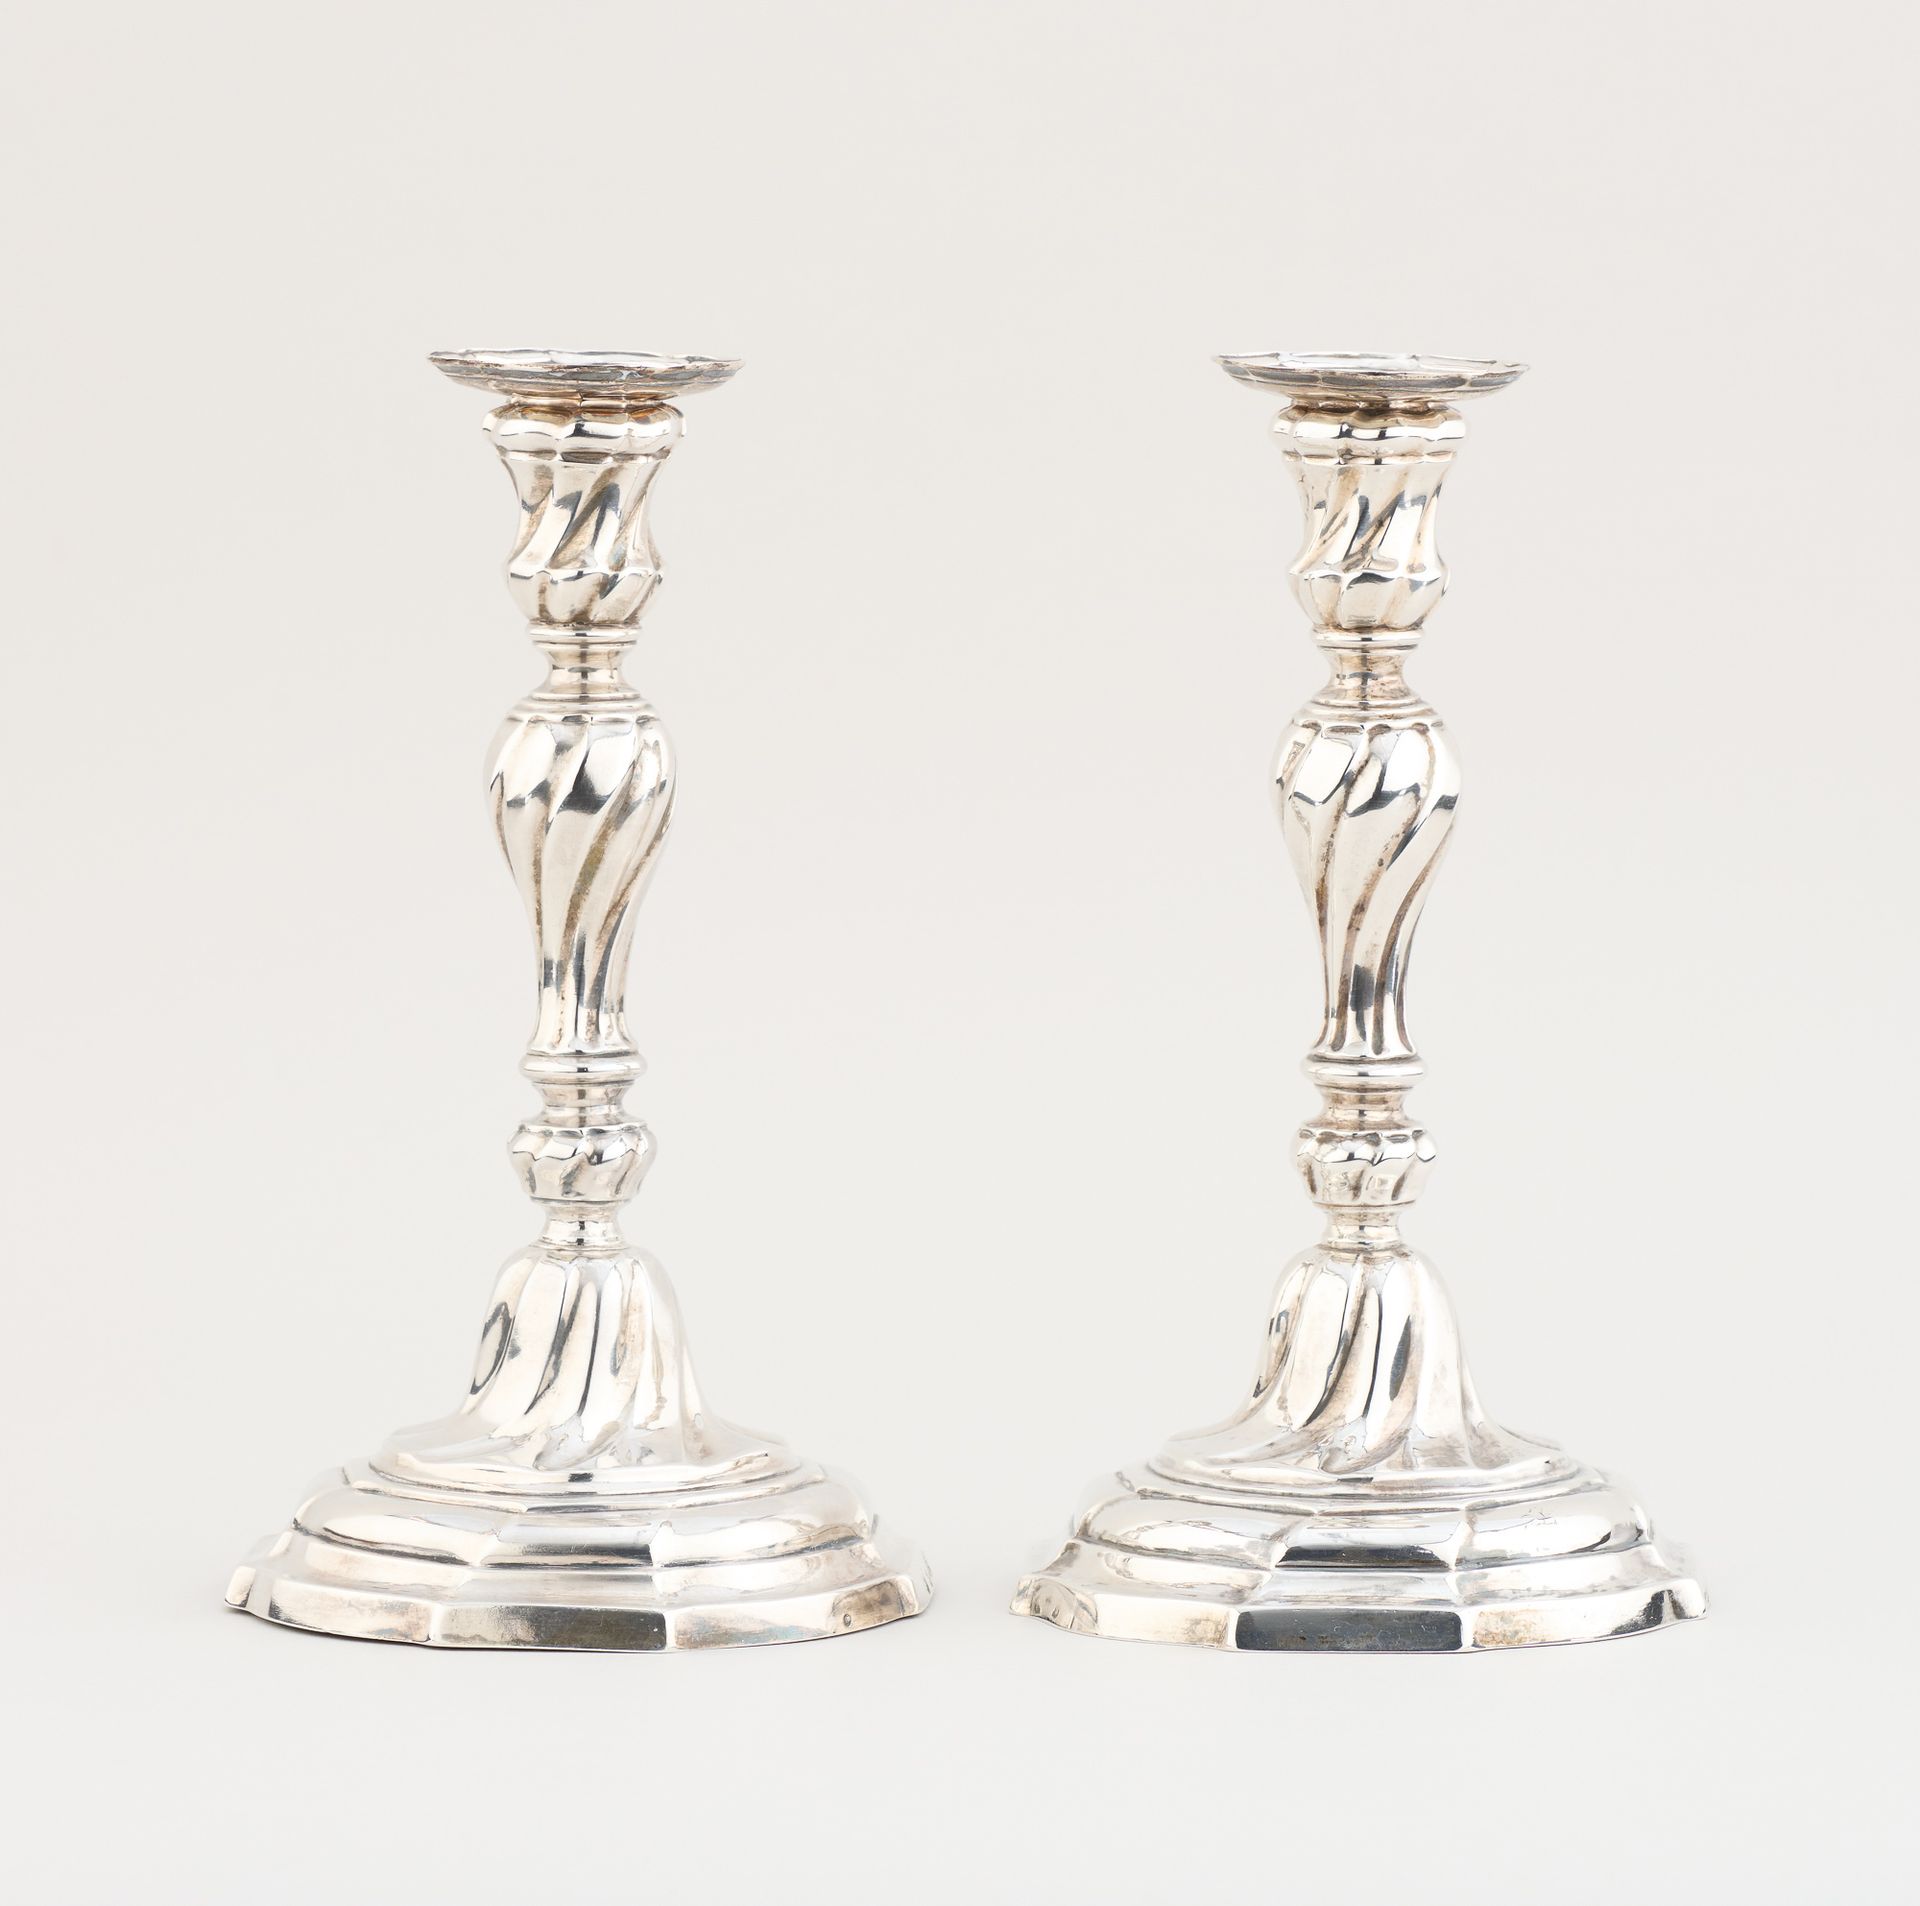 Travail belge 18e. Silverware: Pair of silver candlesticks chased with twisted r&hellip;